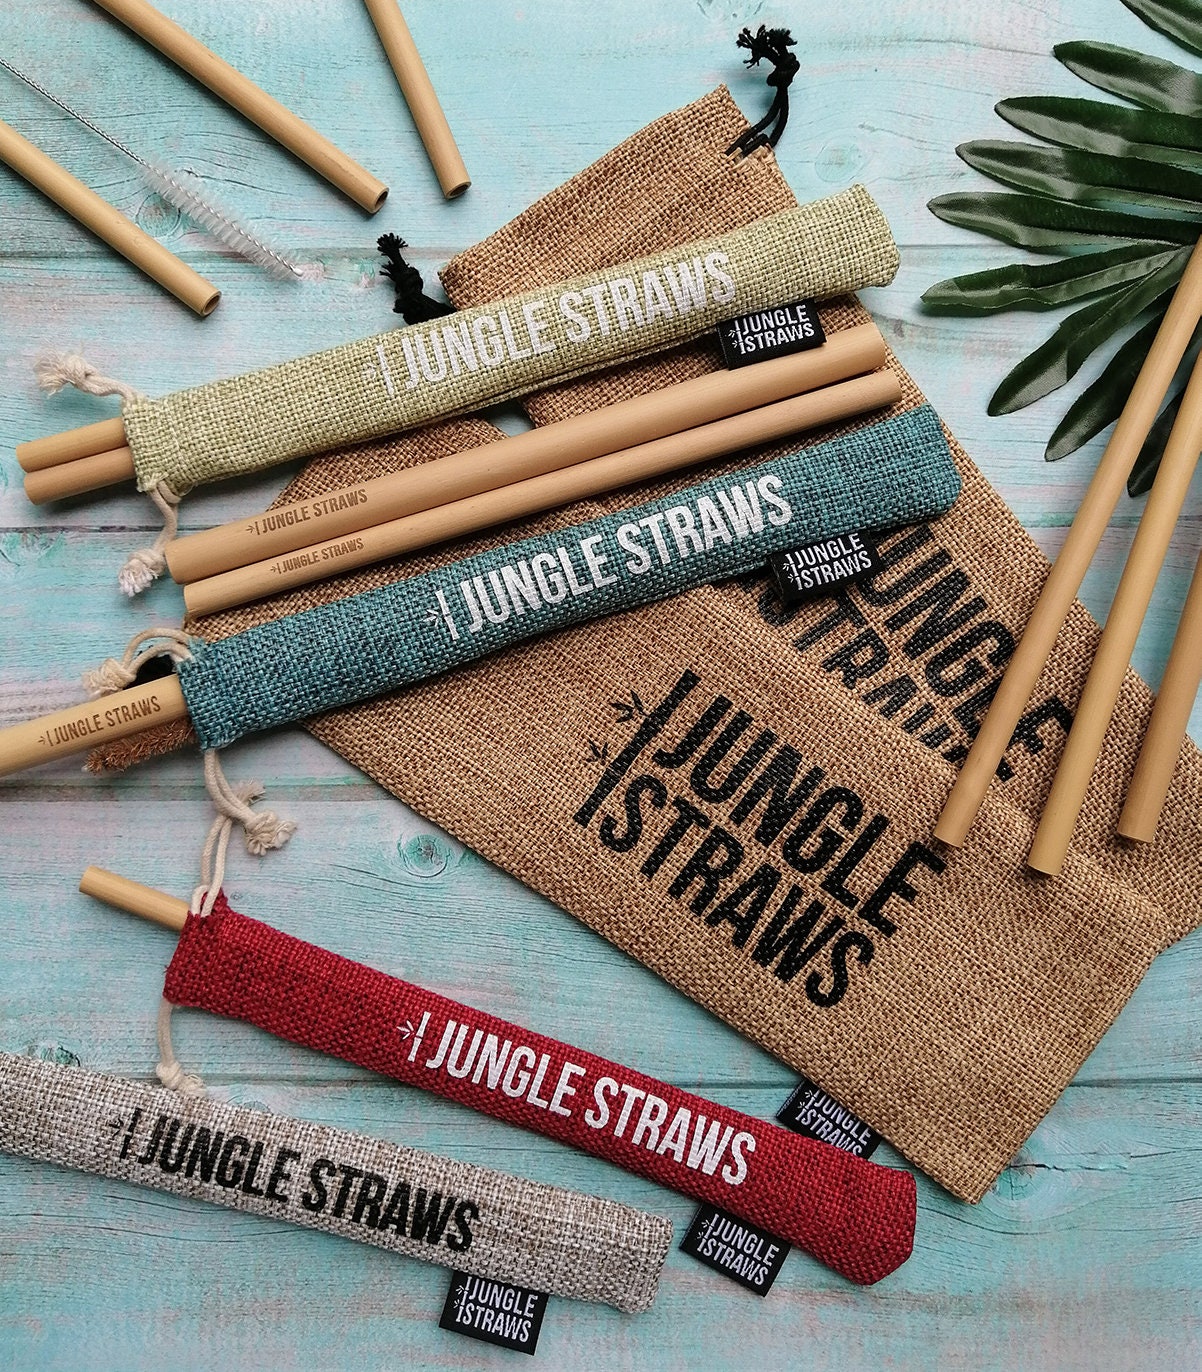 Bulk Bamboo Drinking Straws  Reusable Straws For Businesses - Jungle  Culture